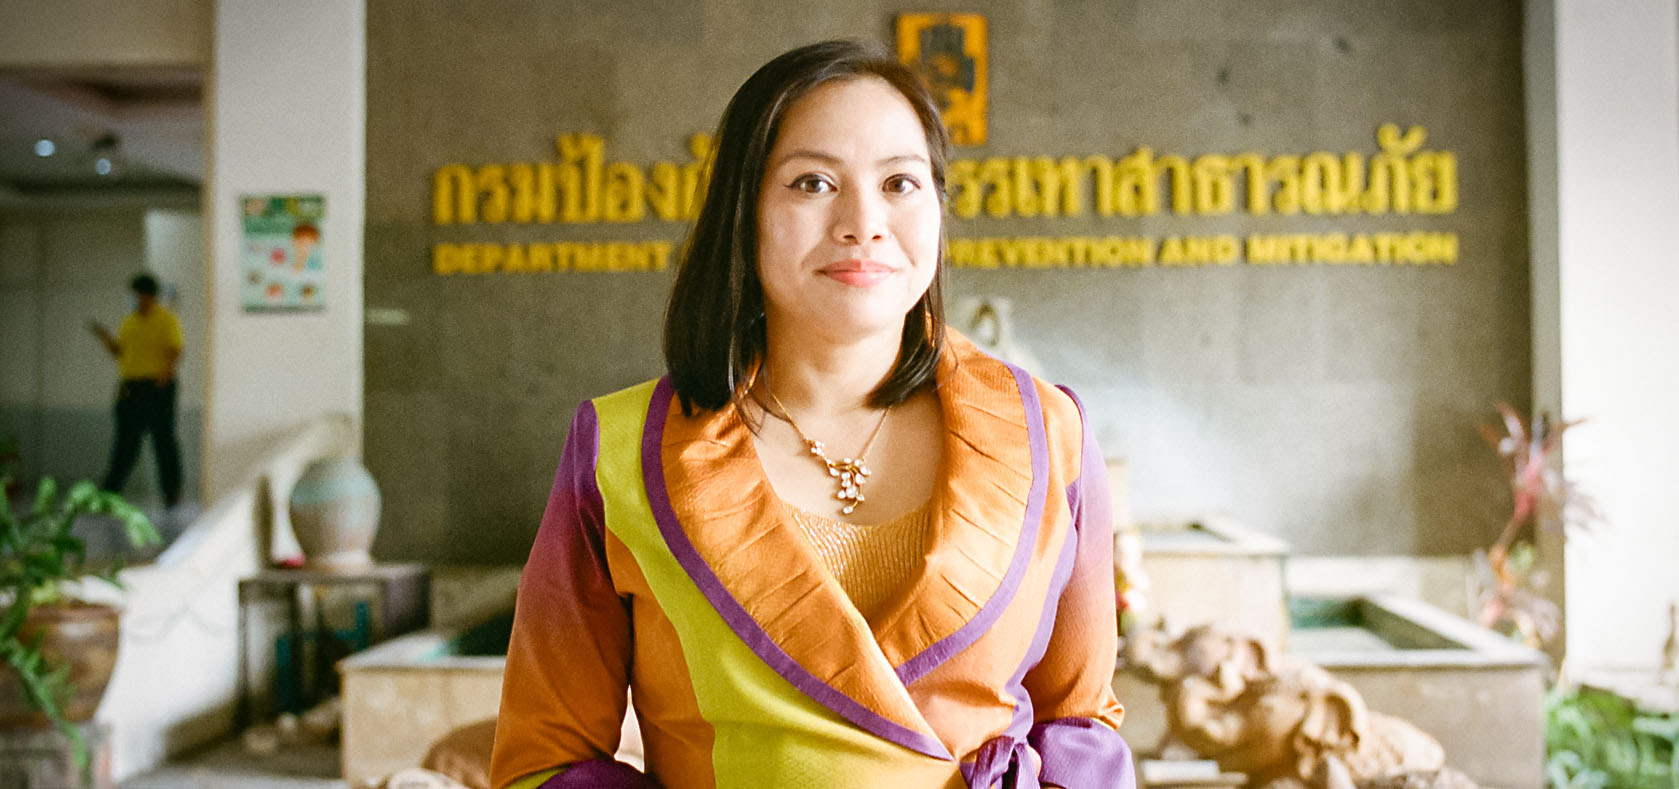 Aimee Na Nan is the director of International Cooperation Section at the Department of Disaster Prevention and Mitigation (DDPM), Ministry of Interior of Thailand. Photo: UN Women